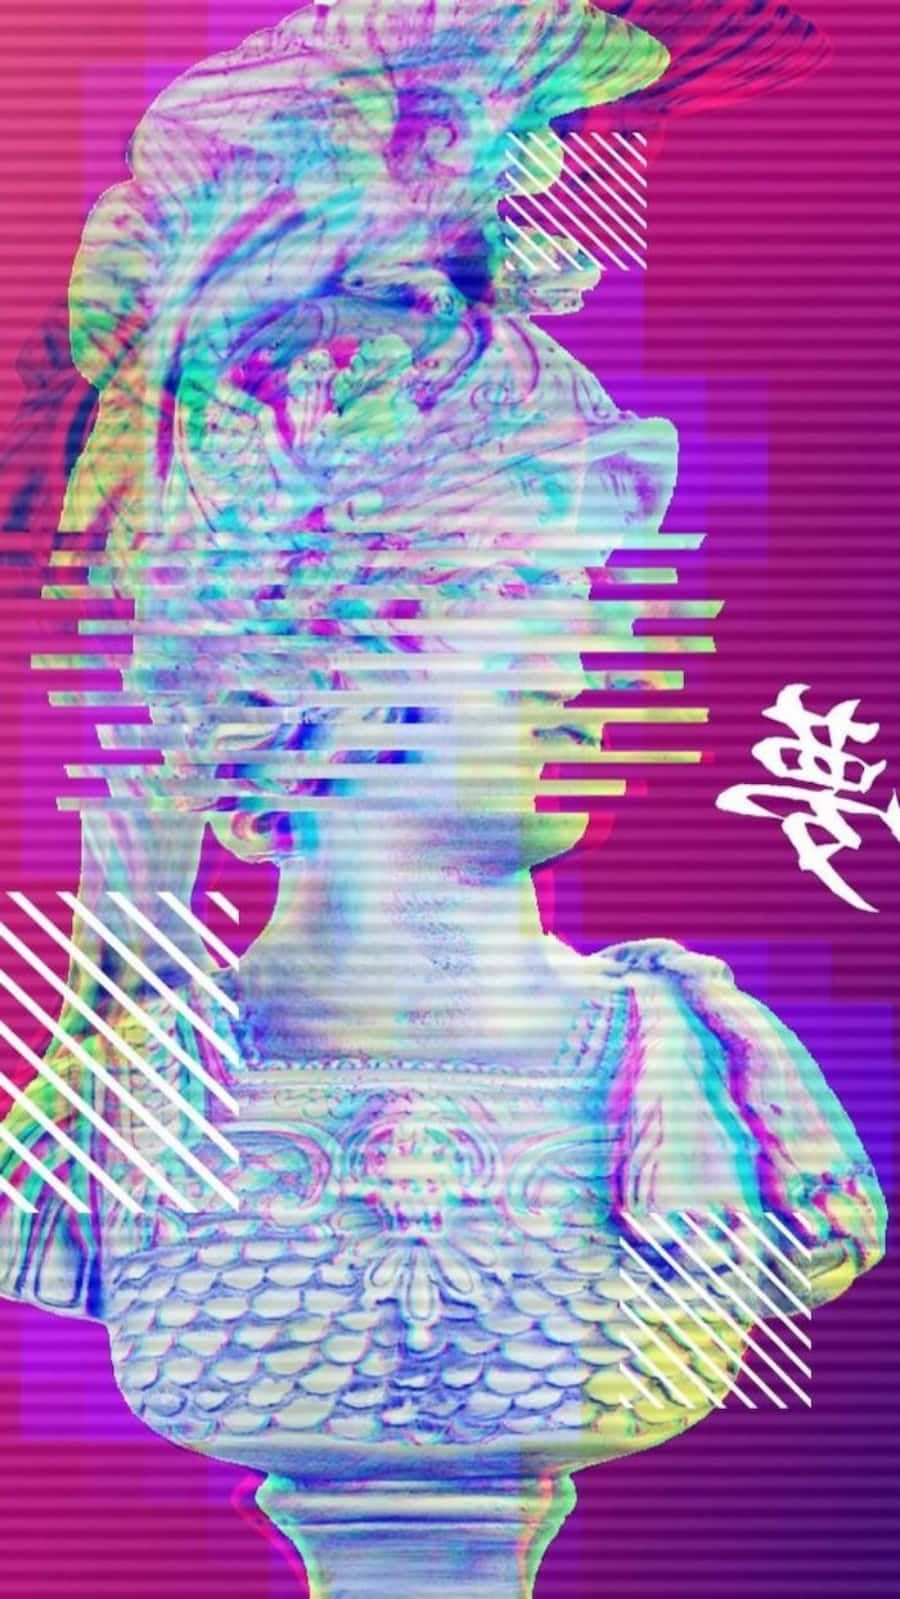 Aesthetic phone wallpaper of a bust of a man with a helmet - Dark vaporwave